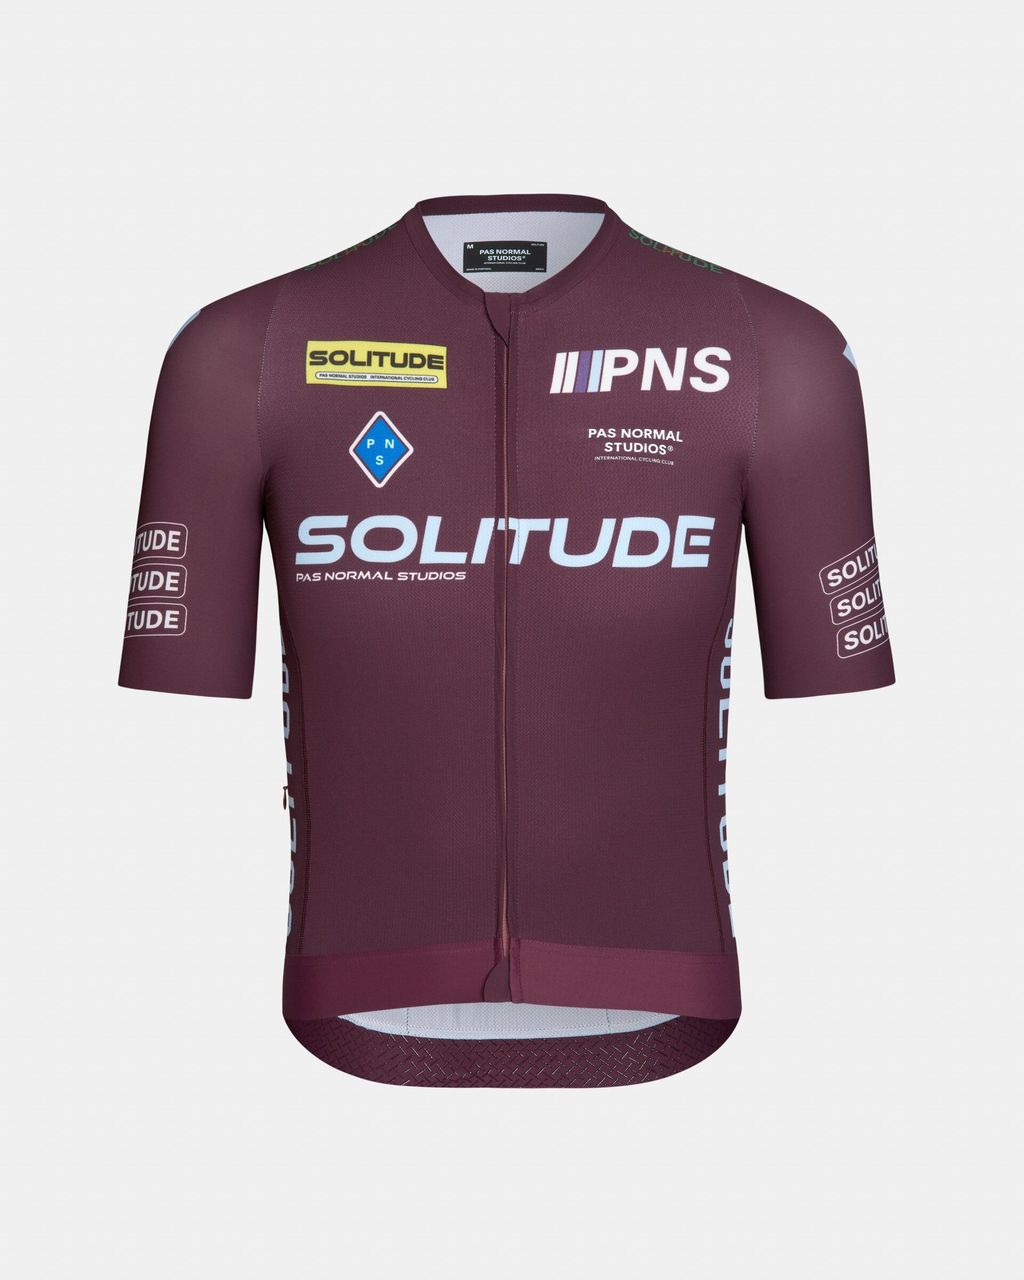 Mens-Solitude-Jesey-Logo_Burgundy_Front-pdp-page